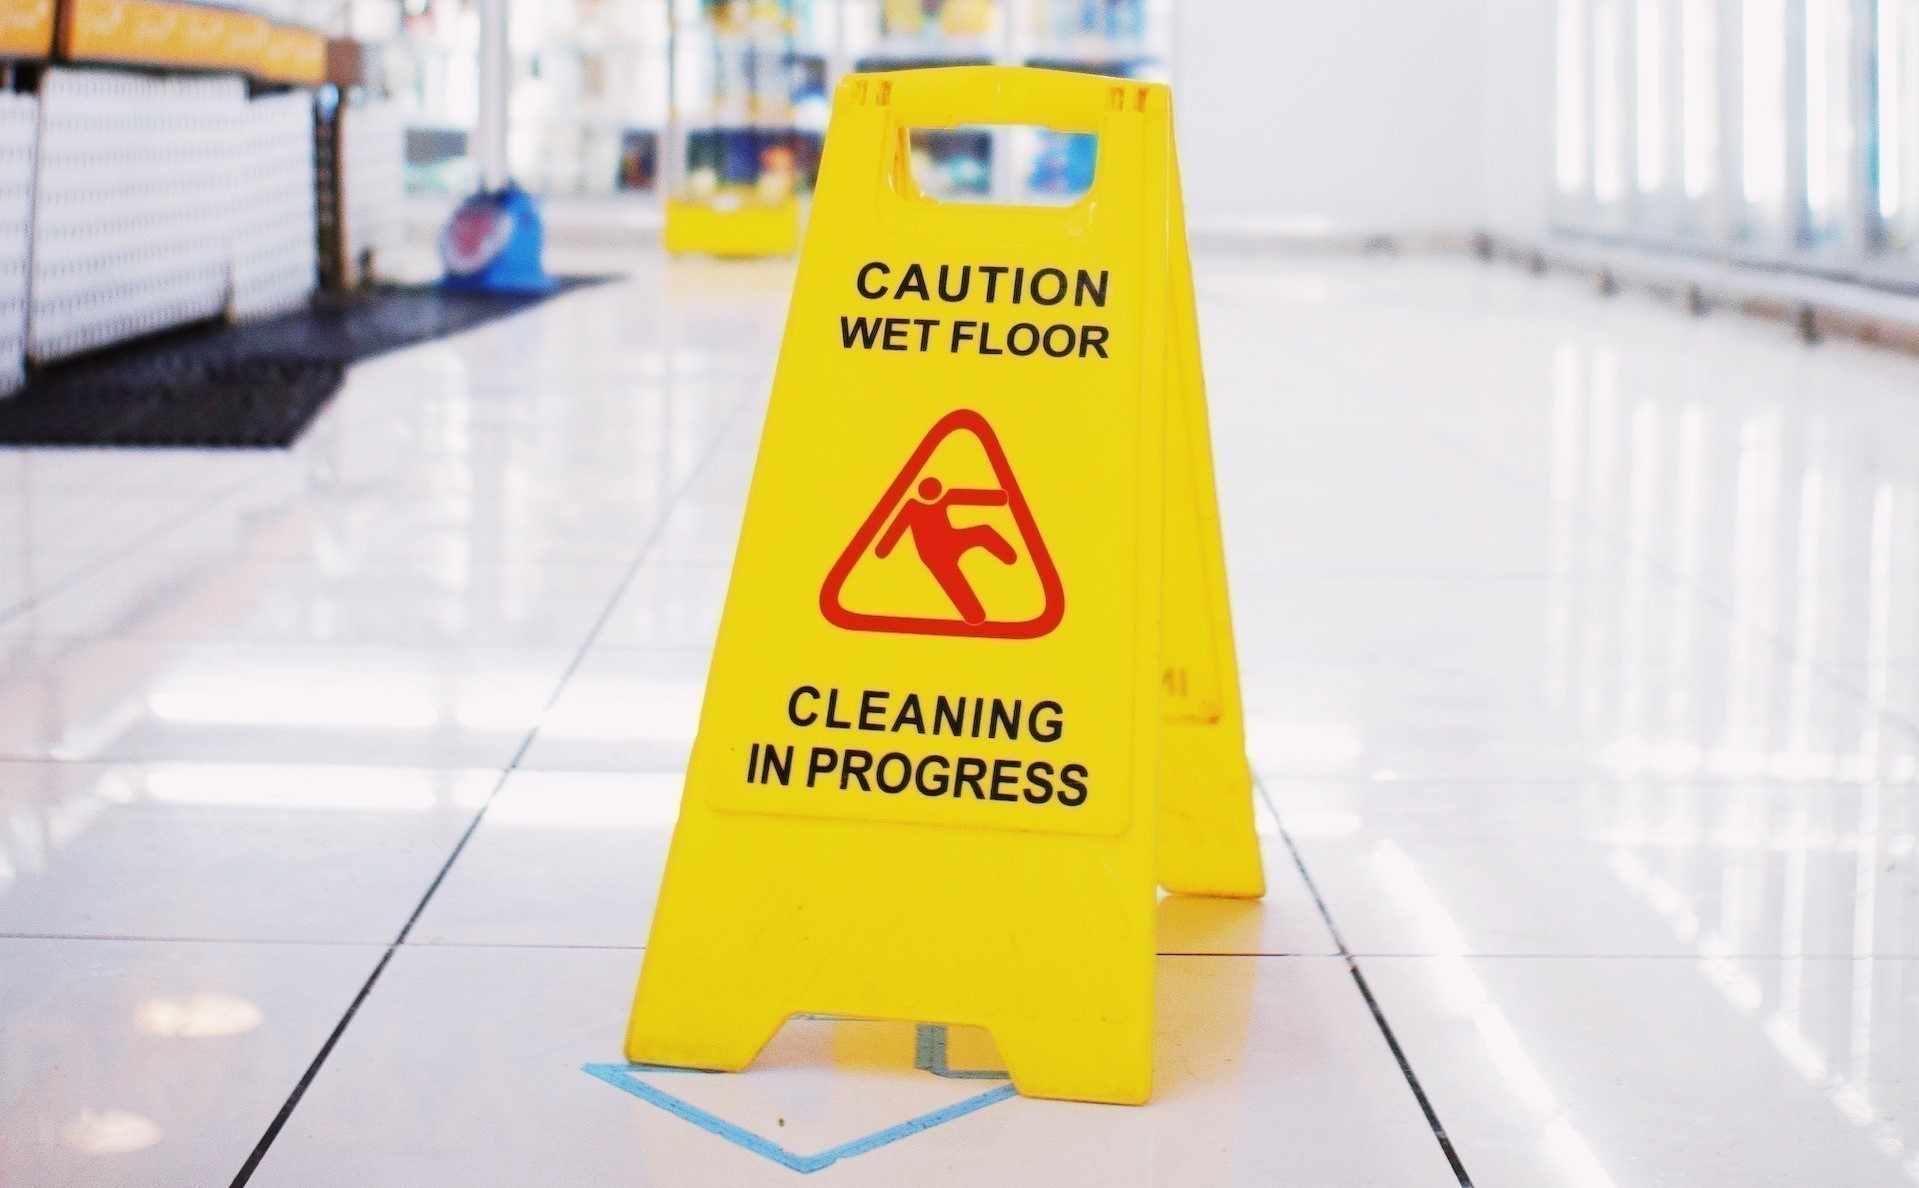 A caution sign warning site visitors about a wet floor